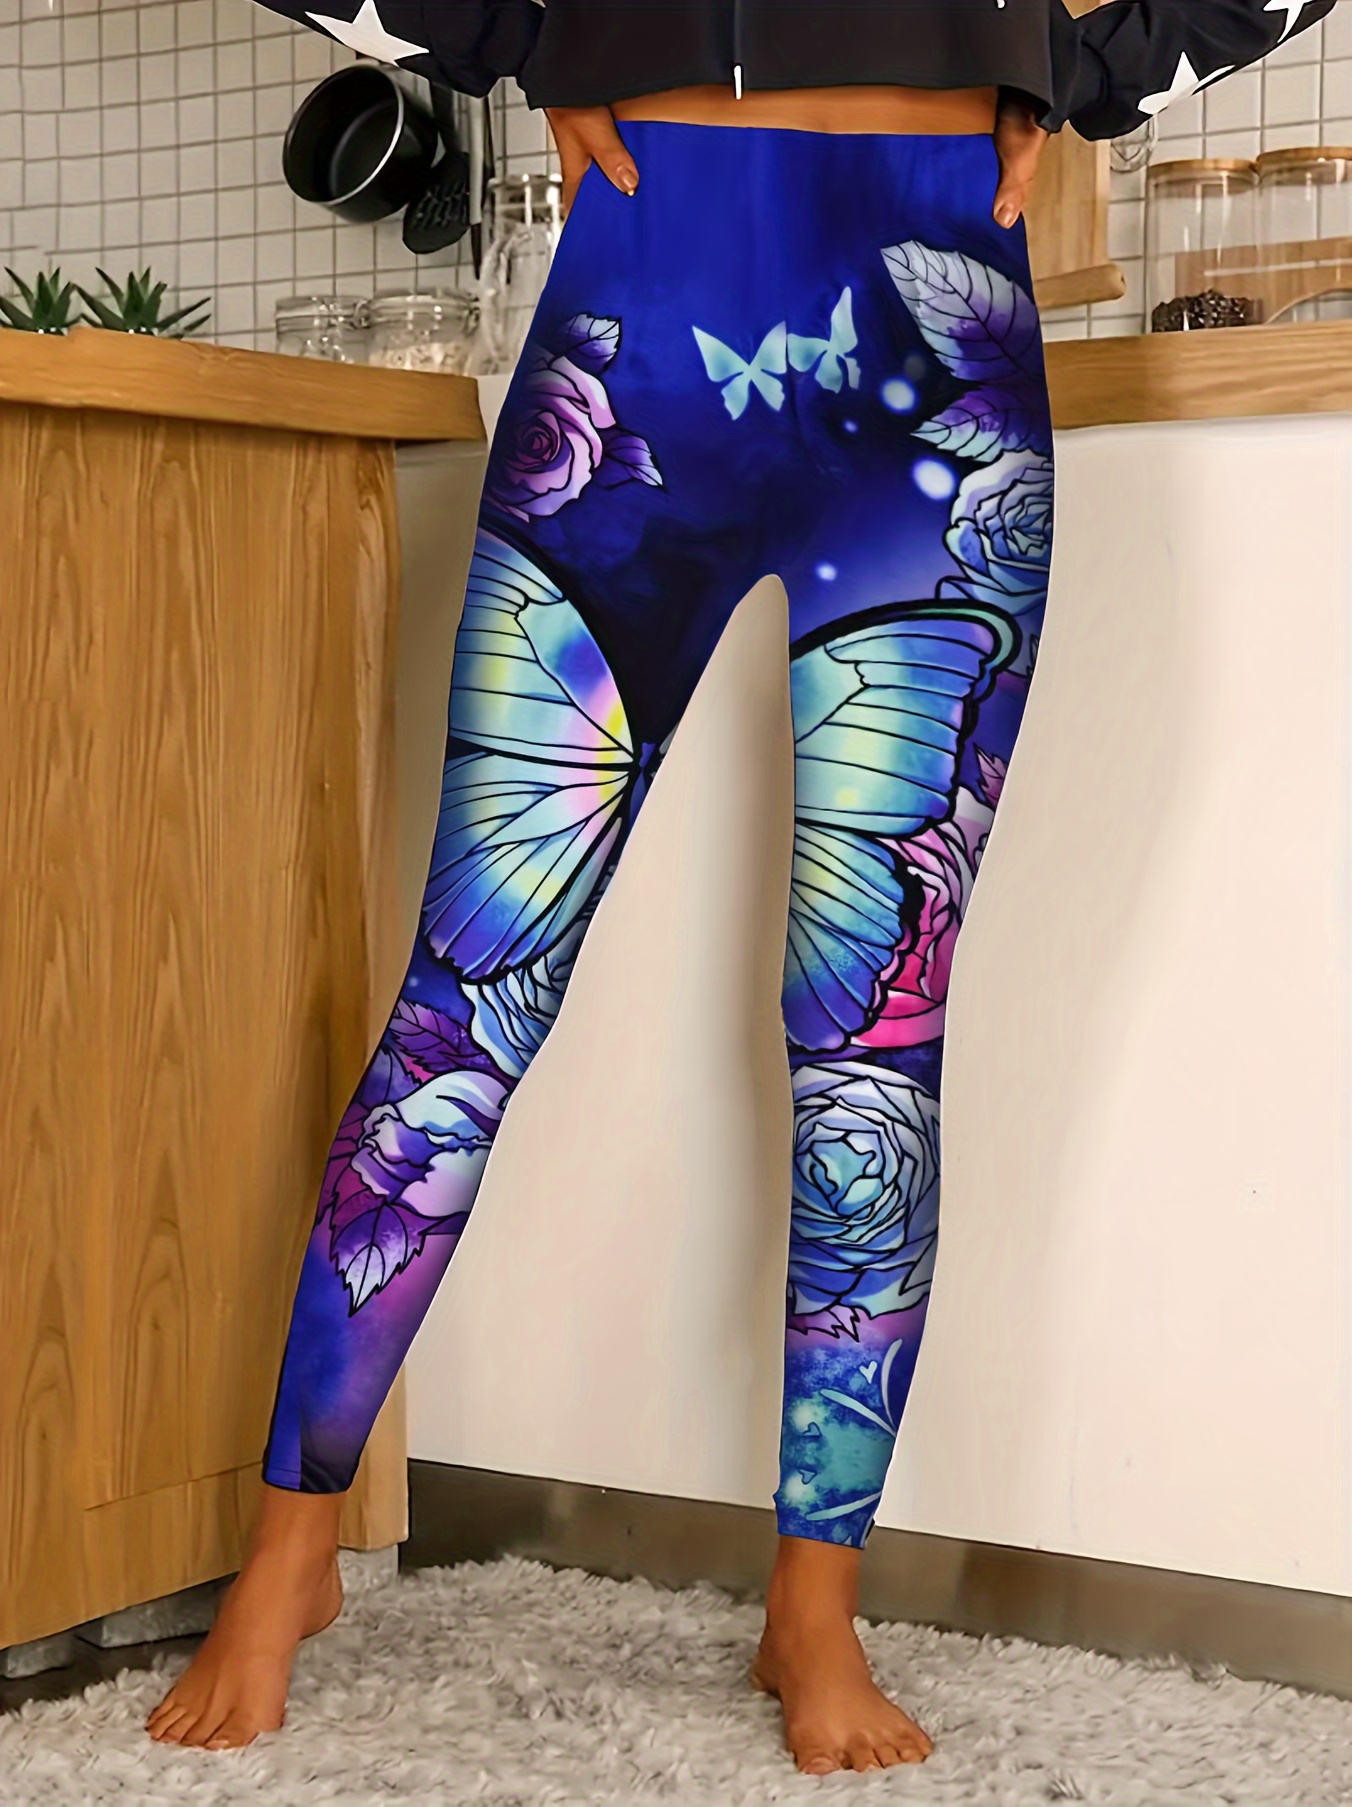 Butterfly Leggings, Flower Printed Pant, Cute Floral Legging, Stretchy  Leggings, Activewear for Women, Running Yoga Pant, Exercise Clothing 